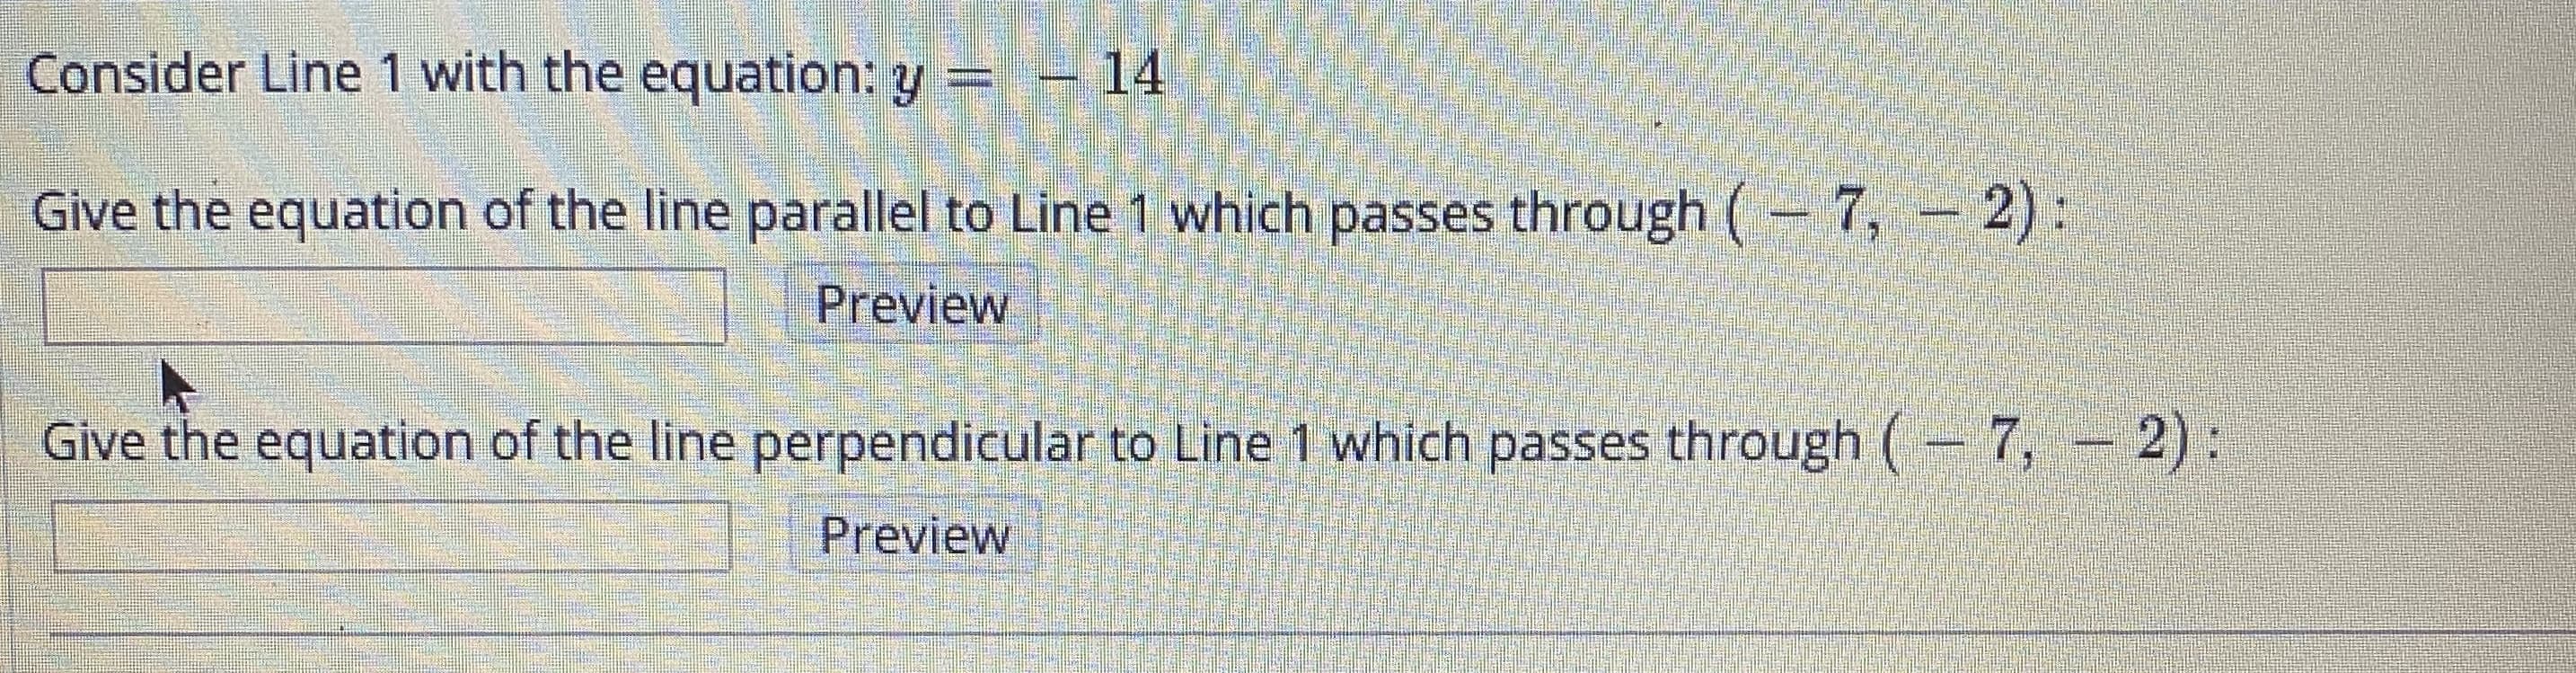 Consider Line 1 with the equation: y =-14
Give the equation of the line parallel to Line 1 which passes through (- 7, - 2):
Preview
Give the equation of the line perpendicular to Line 1 which passes through ( 7, – 2):
Preview
